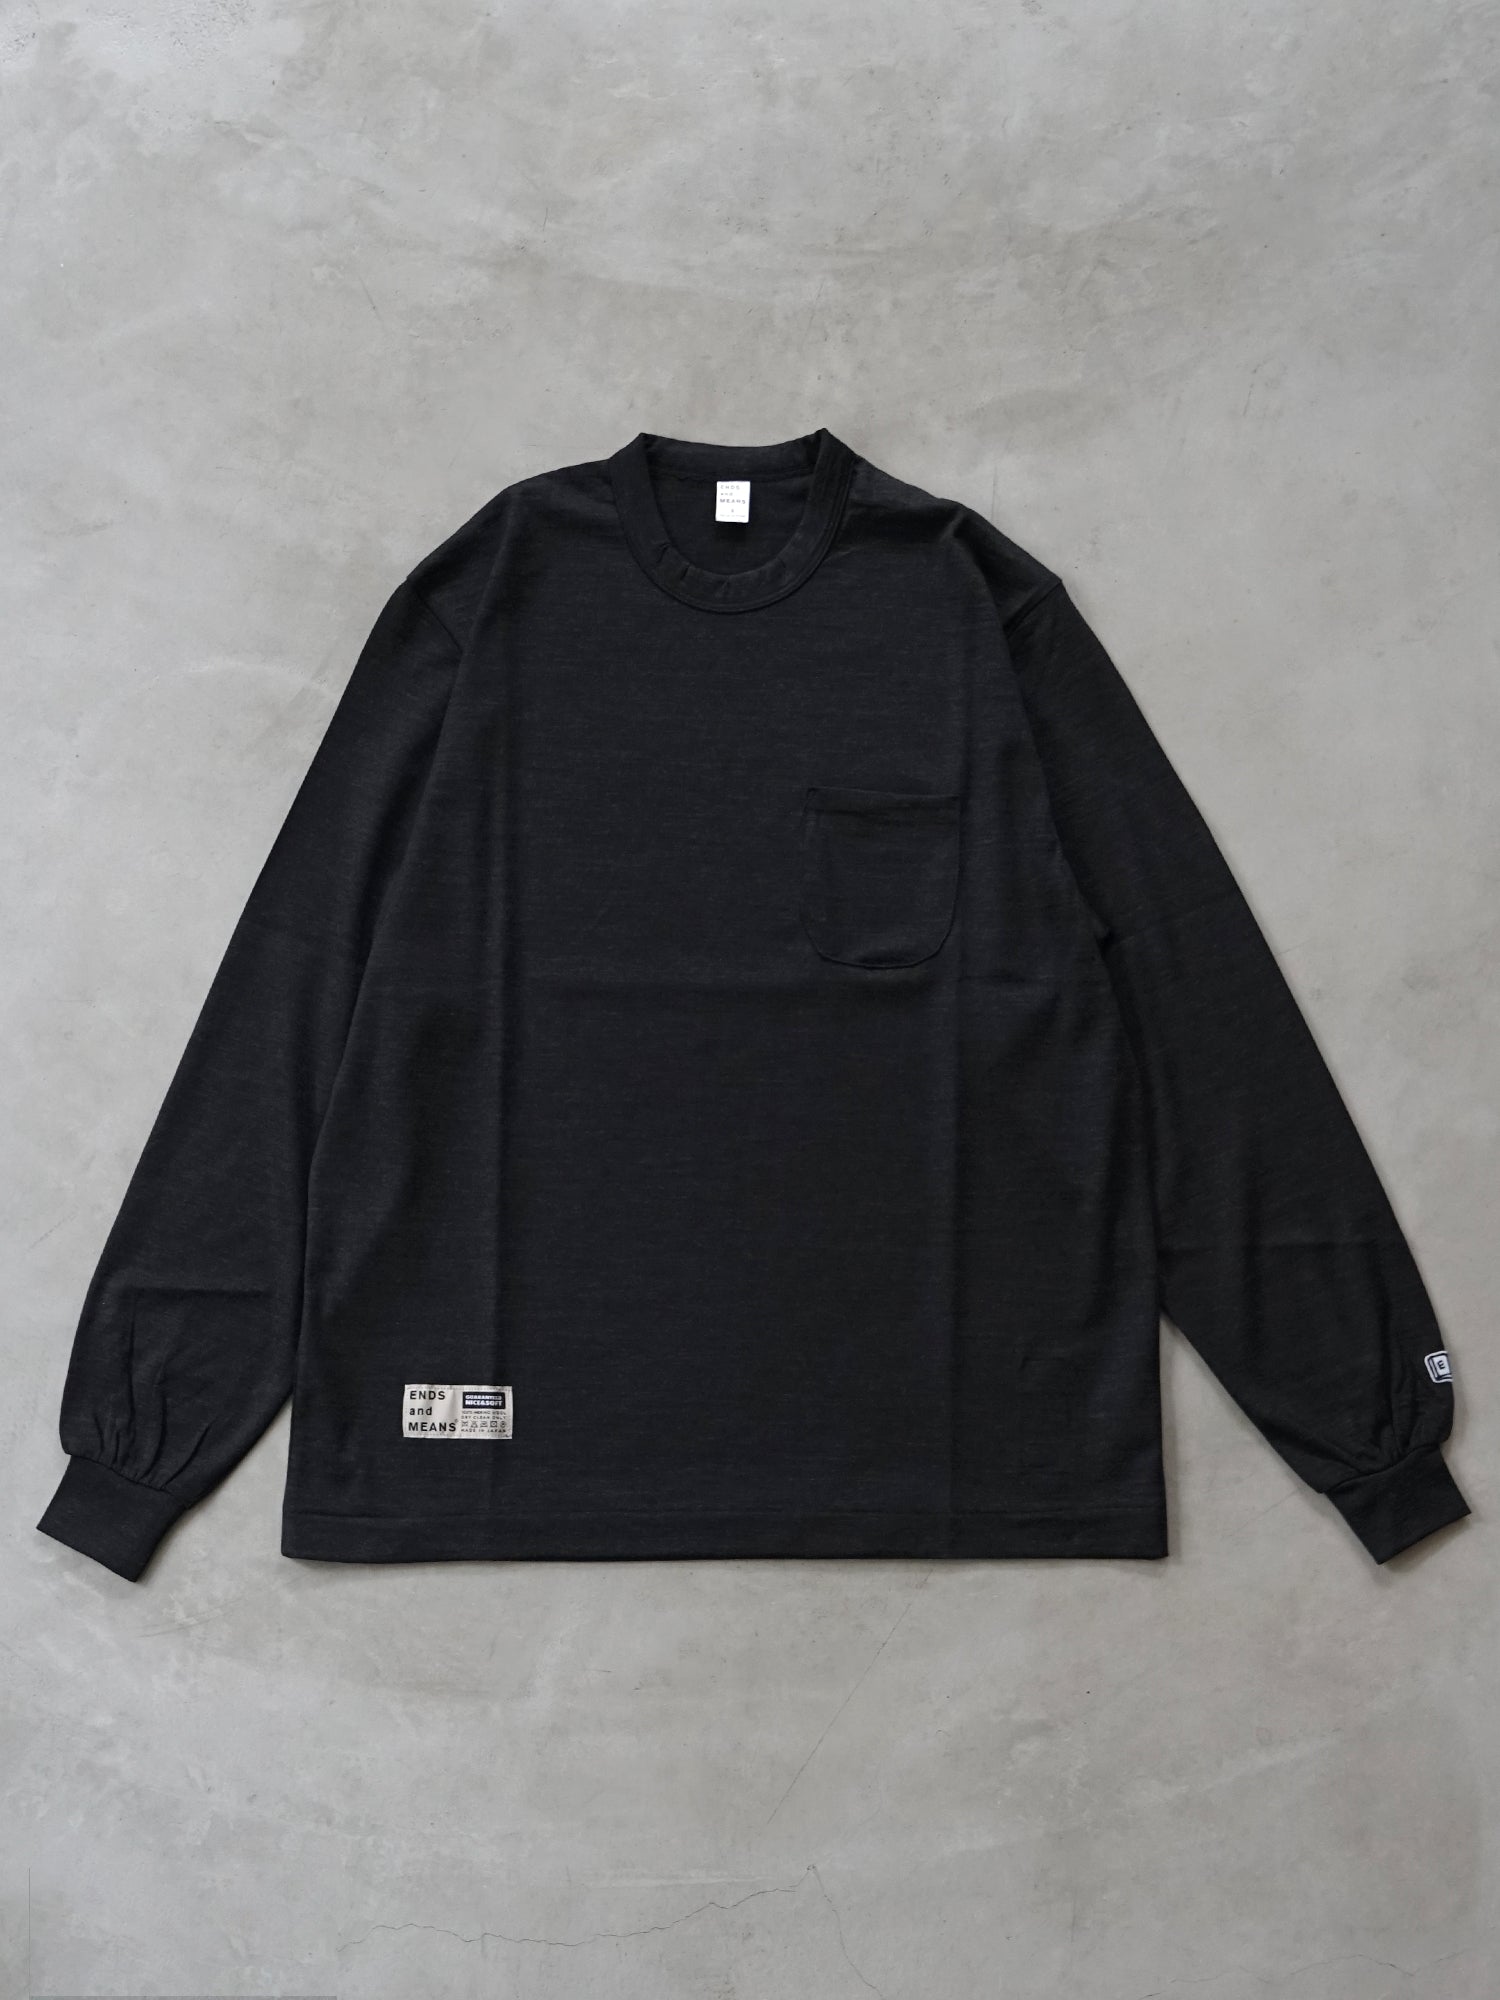 ENDS AND MEANS Merino Wool L/S TeeSizeM - Tシャツ/カットソー(七分